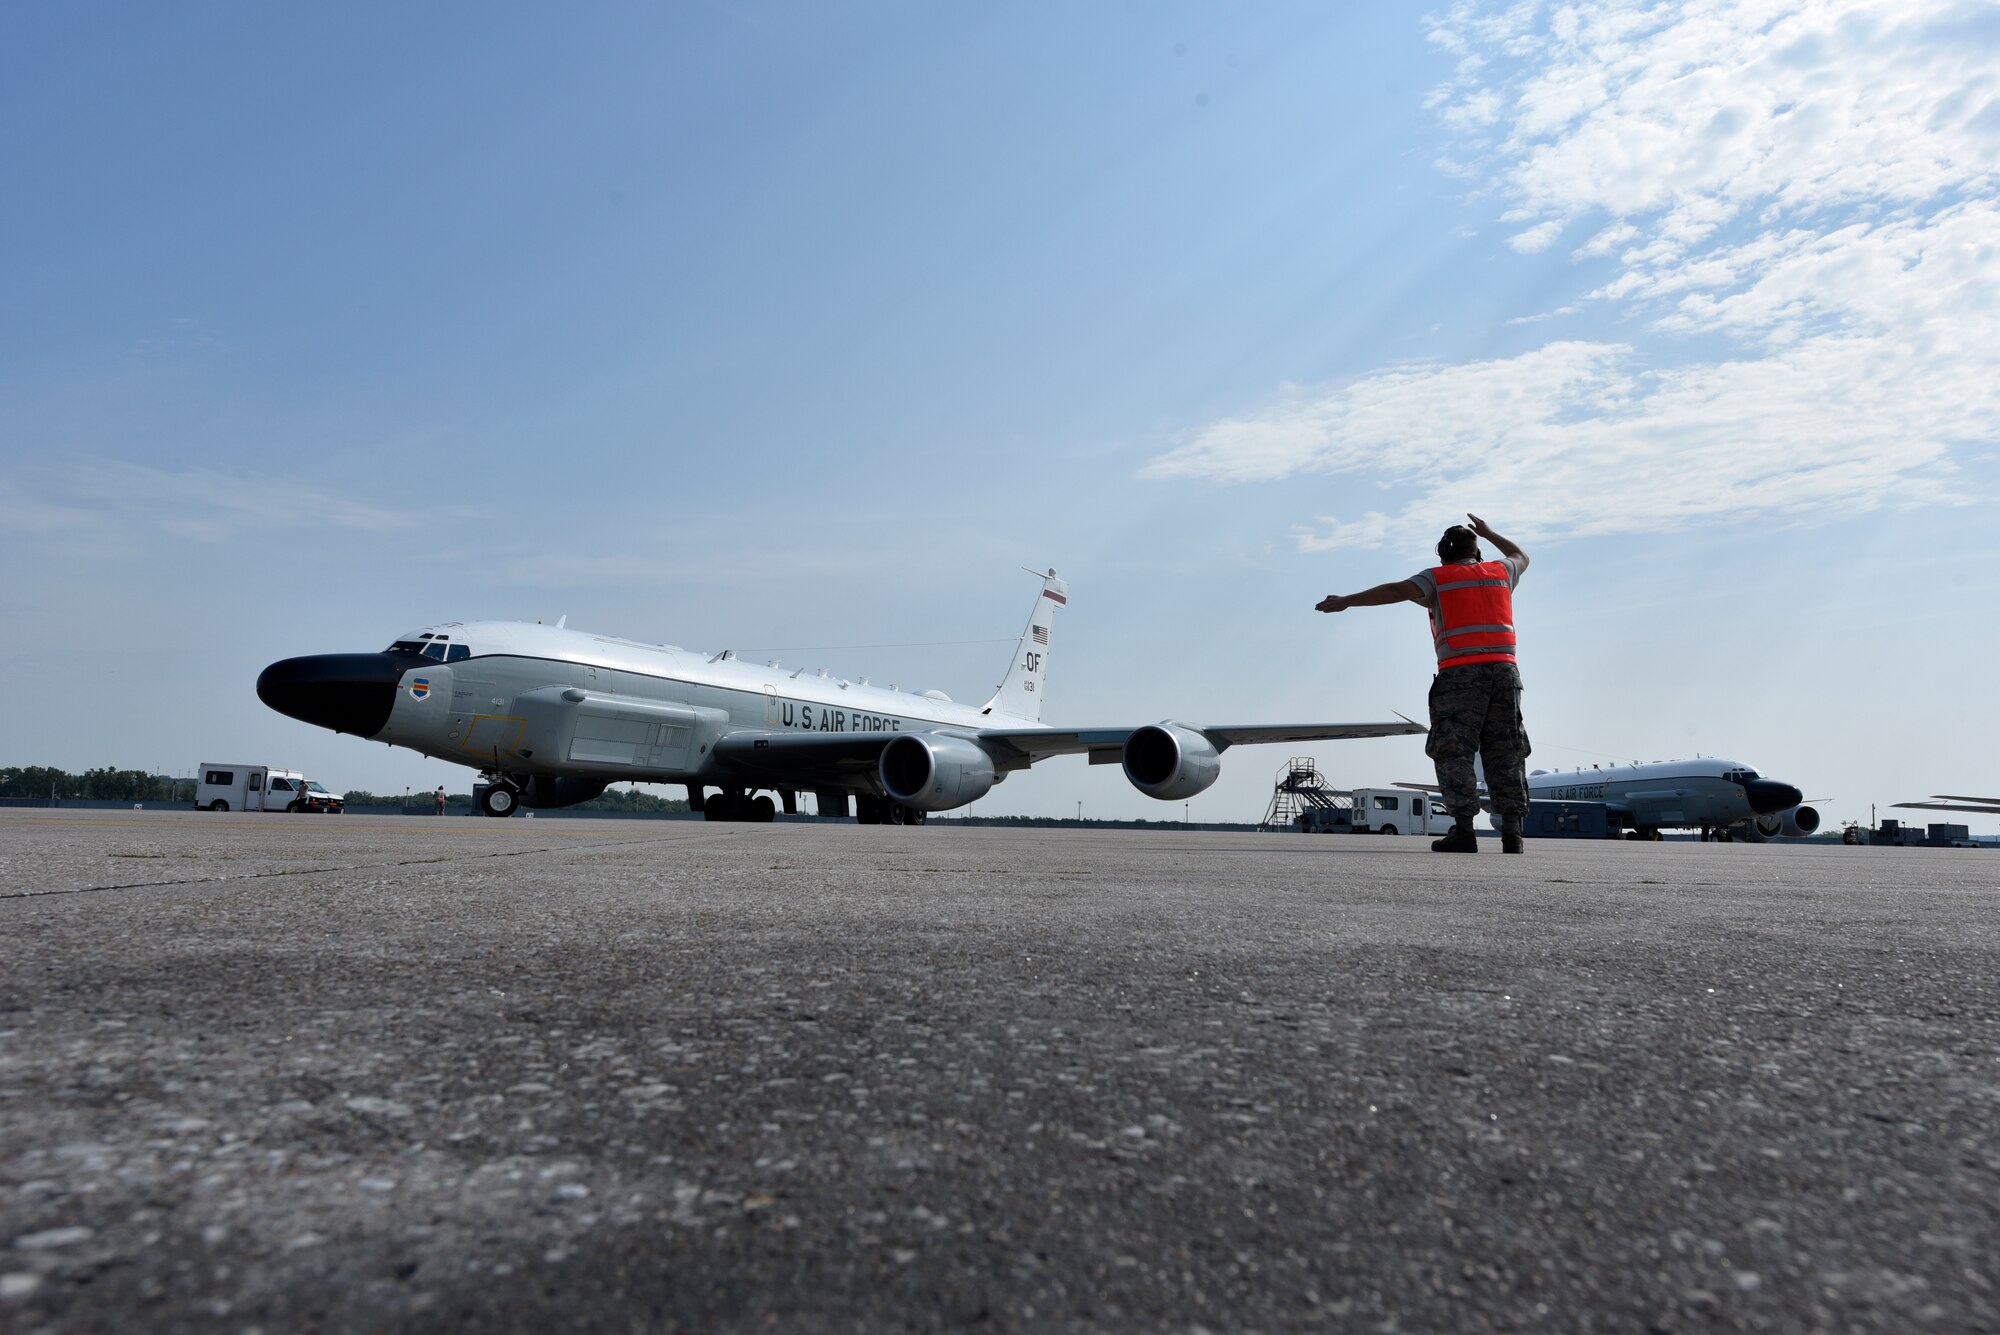 A 55th Aircraft Maintenance Squadron member marshalls a RC-135V/W Rivet Joint from its parking spot  for a weekend training sortie Aug. 5, 2018 at Offutt Air Force Base, Nebraska. The aircraft is an extensively modified C-135. The Rivet Joint's modifications are primarily related to its on-board sensor suite, which allows the mission crew to detect, identify and geolocate signals throughout the electromagnetic spectrum. The mission crew can then forward gathered information in a variety of formats to a wide range of consumers via Rivet Joint's extensive communications suite. (U.S. Air Force photo by 2nd Lt. Drew Nystrom)